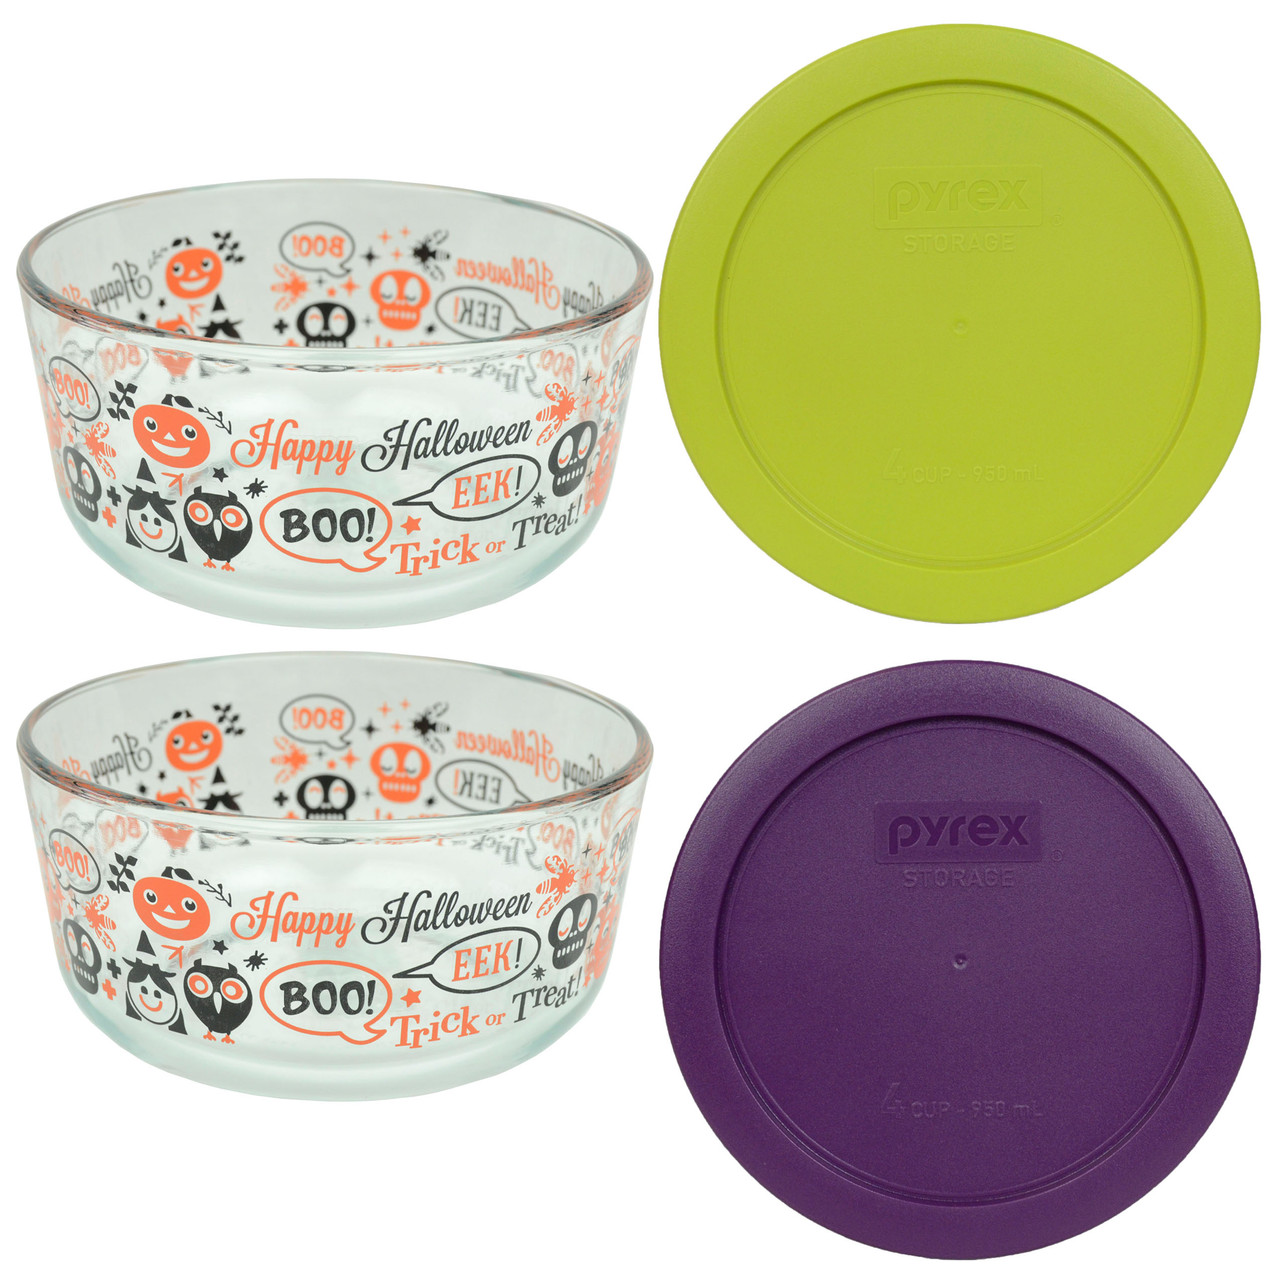 is pyrex glass bowls safe for oven